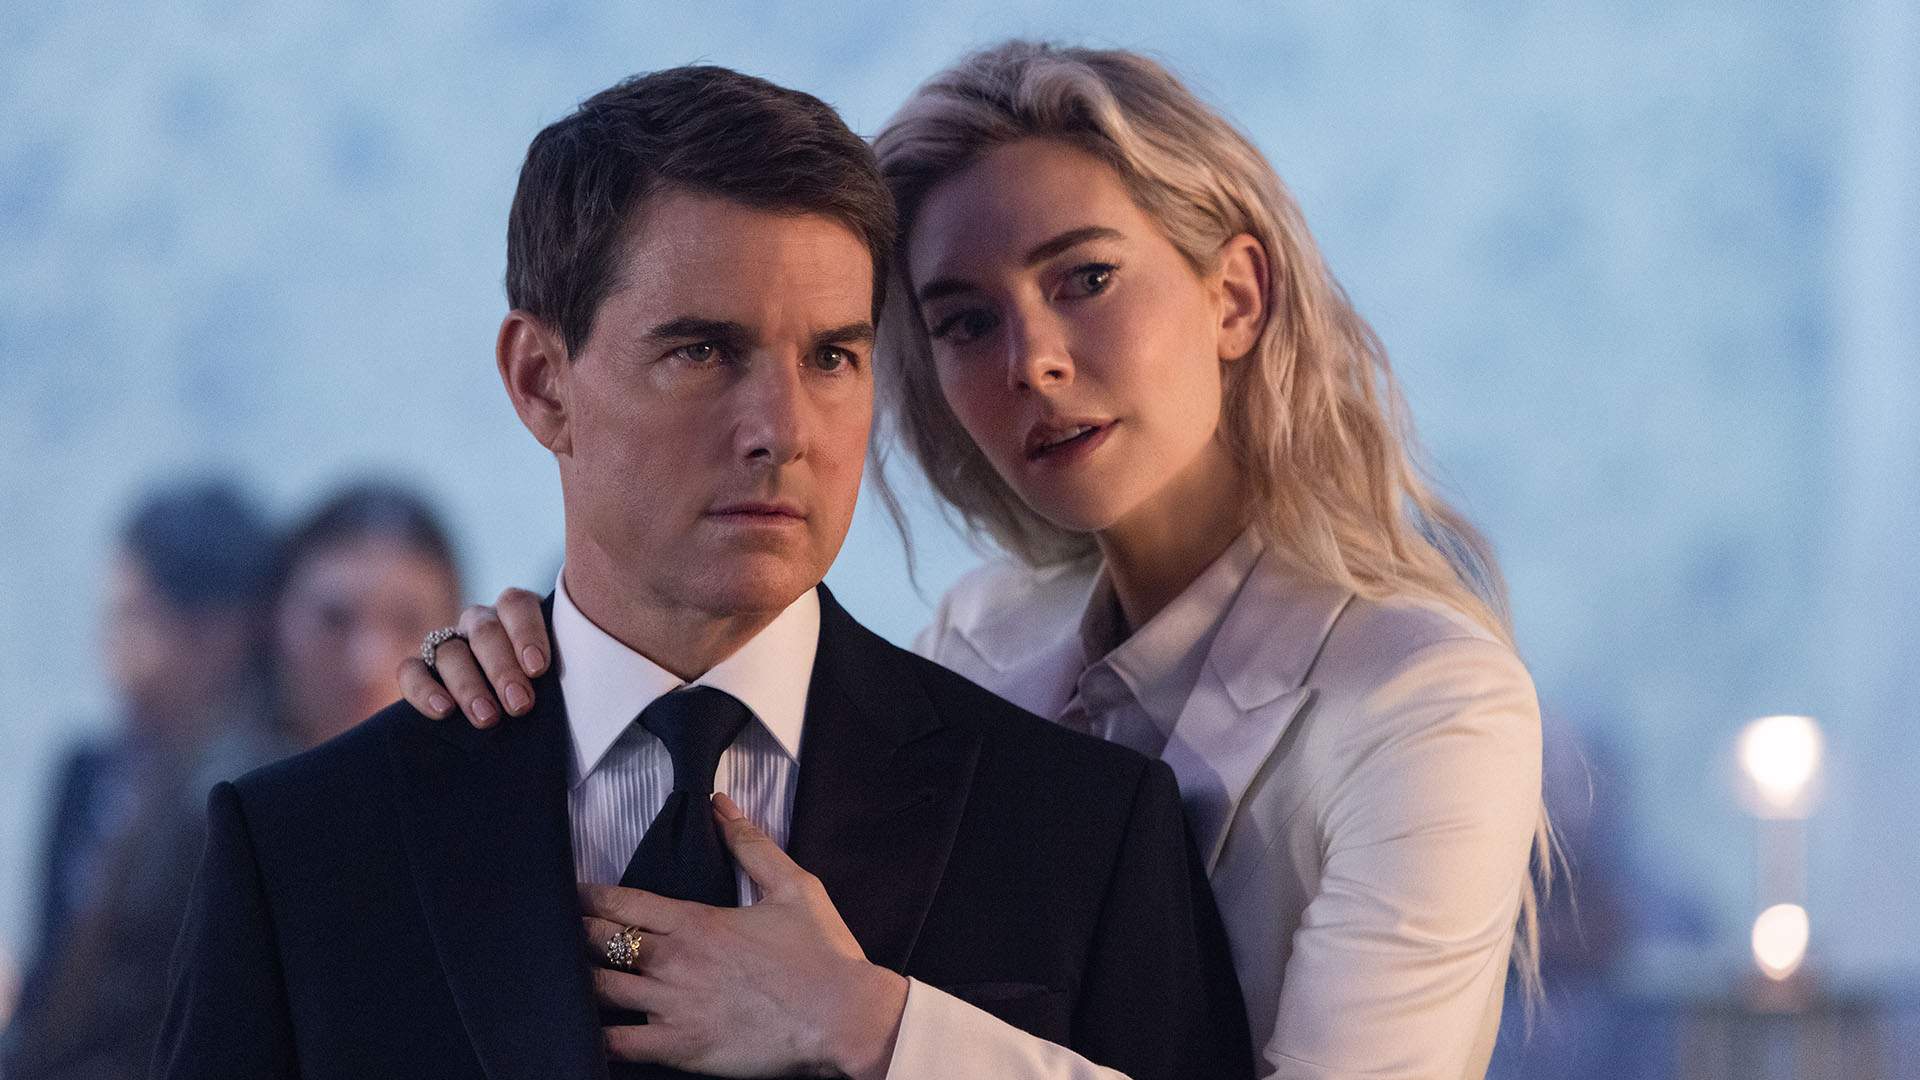 The Next 'Mission: Impossible' Movie Has Been Delayed to 2025 Amid Hollywood's Actors' Strike